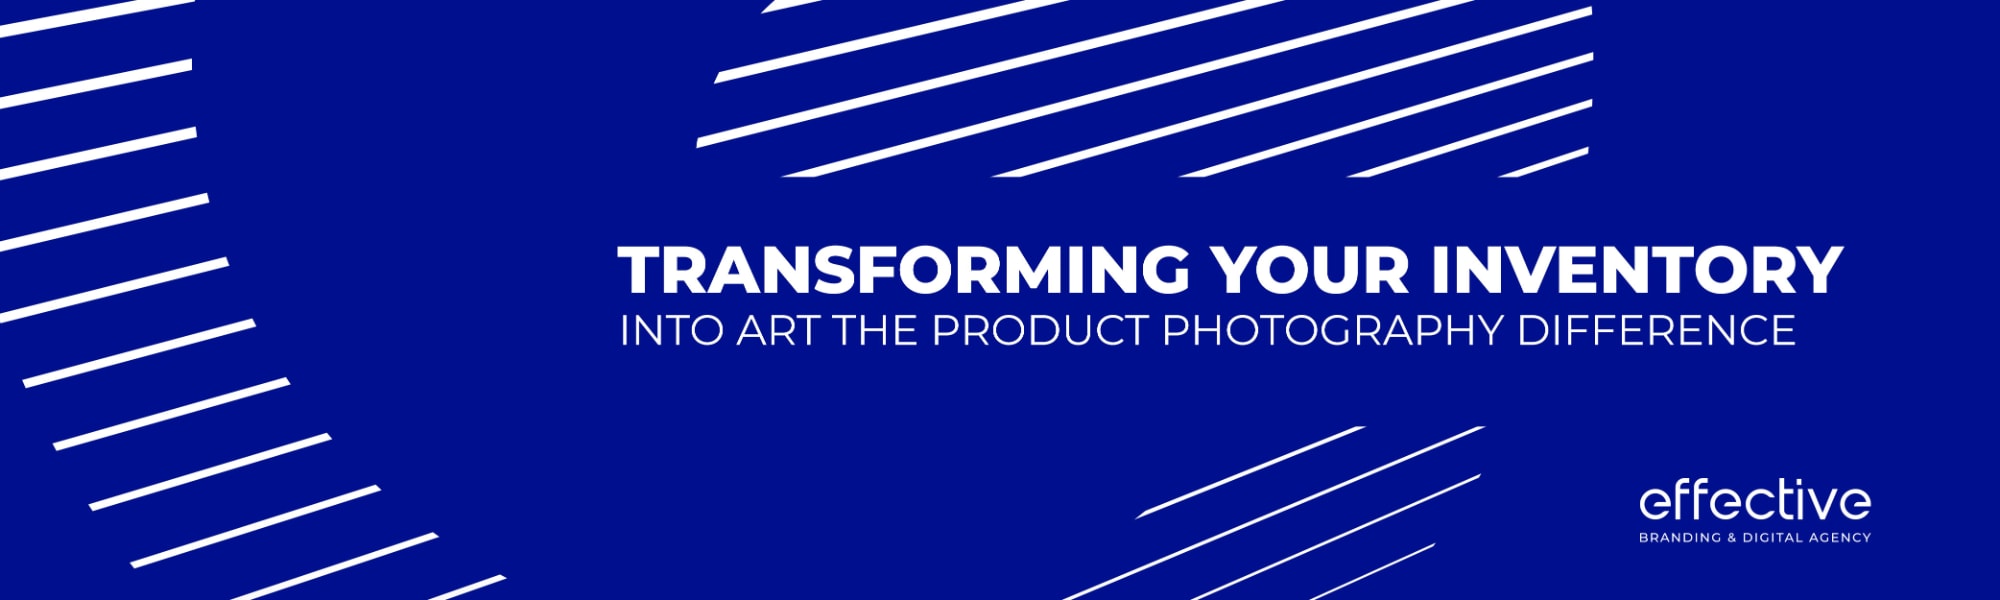 Transforming Your Inventory into Art The Product Photography Difference